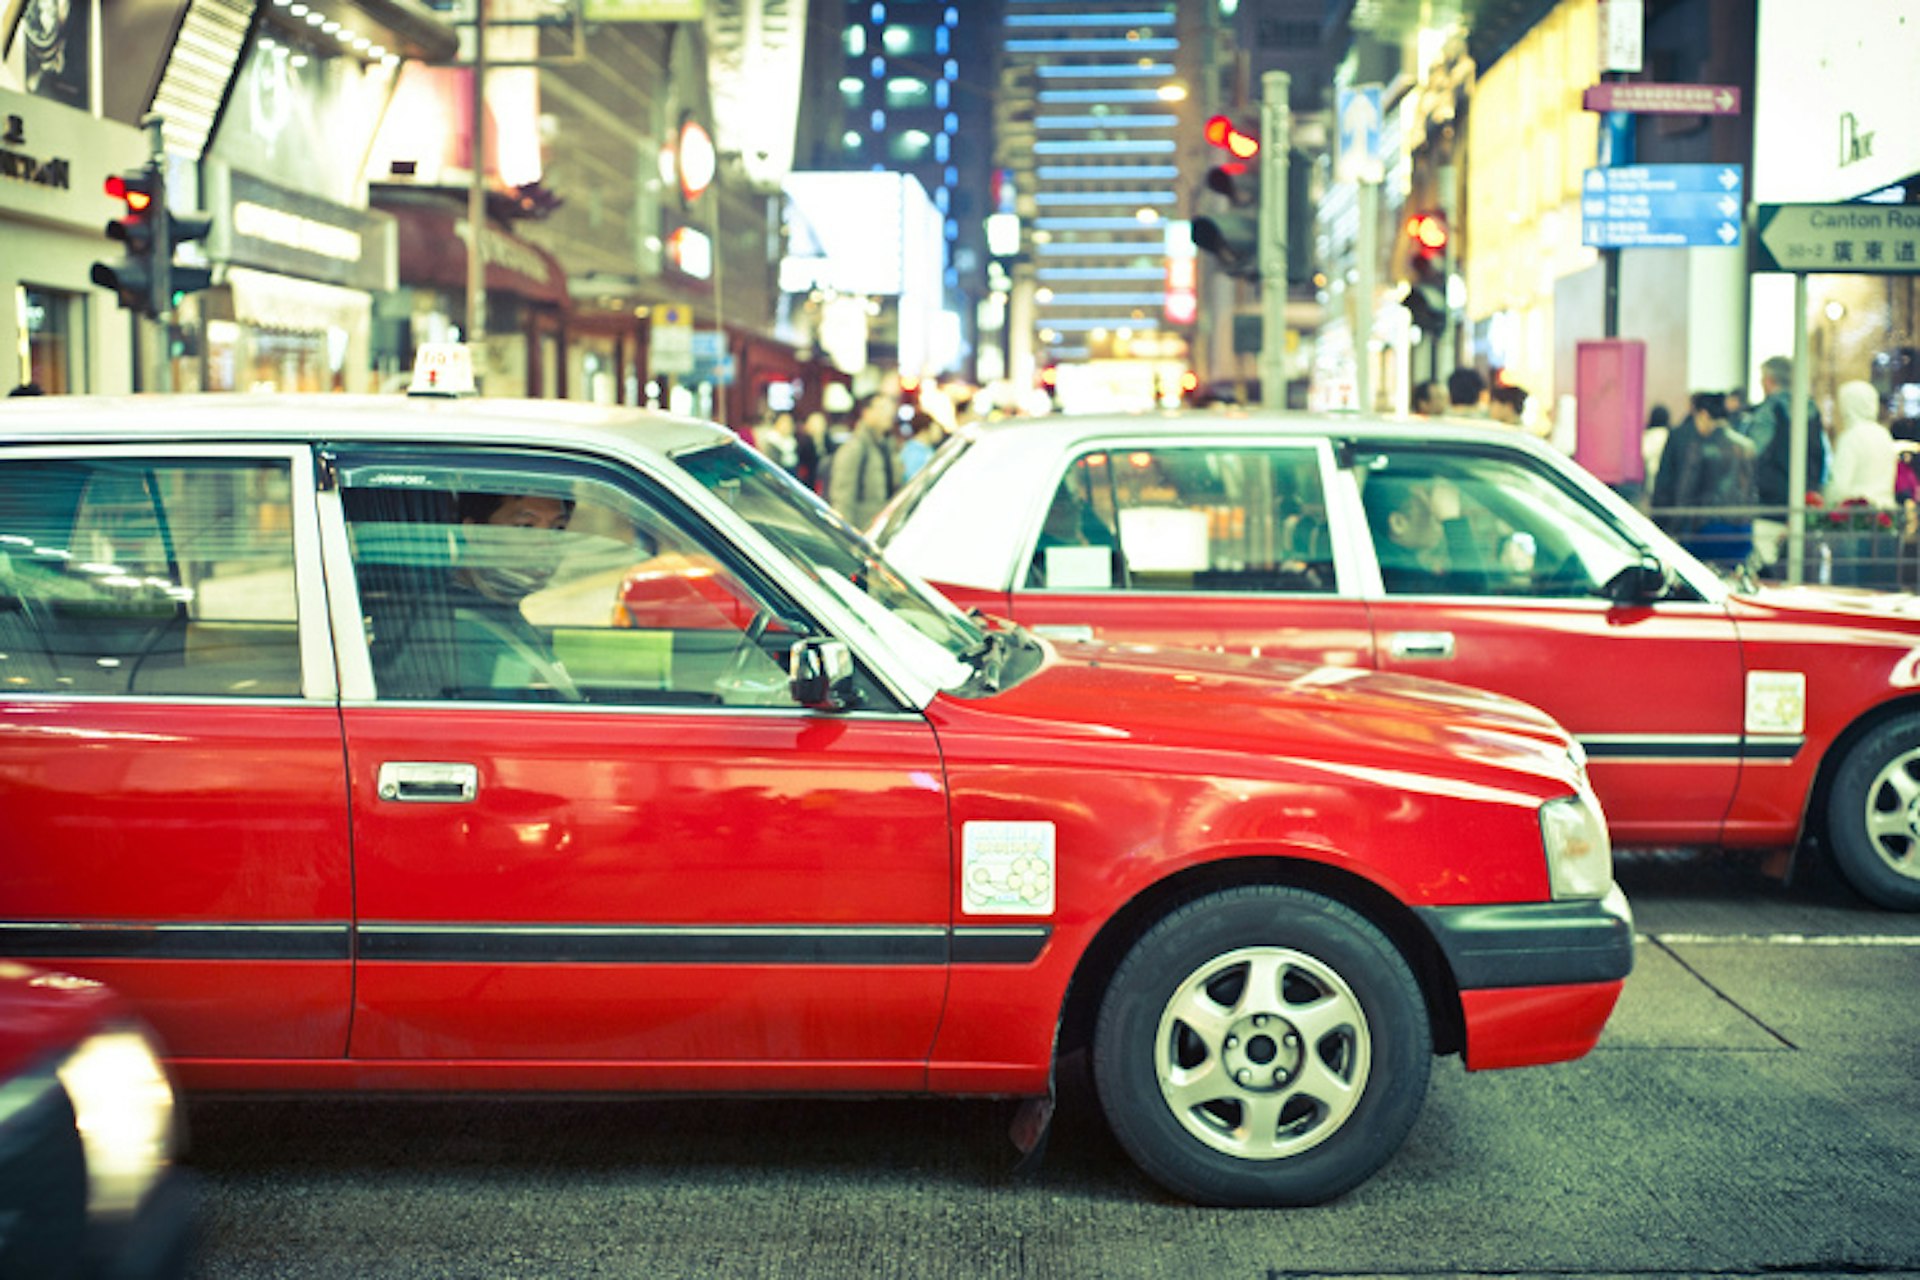 Red taxis: a mainstay of Kowloon's nightlife. Image by Tauno Tõhk / 陶诺 / CC BY 2.0